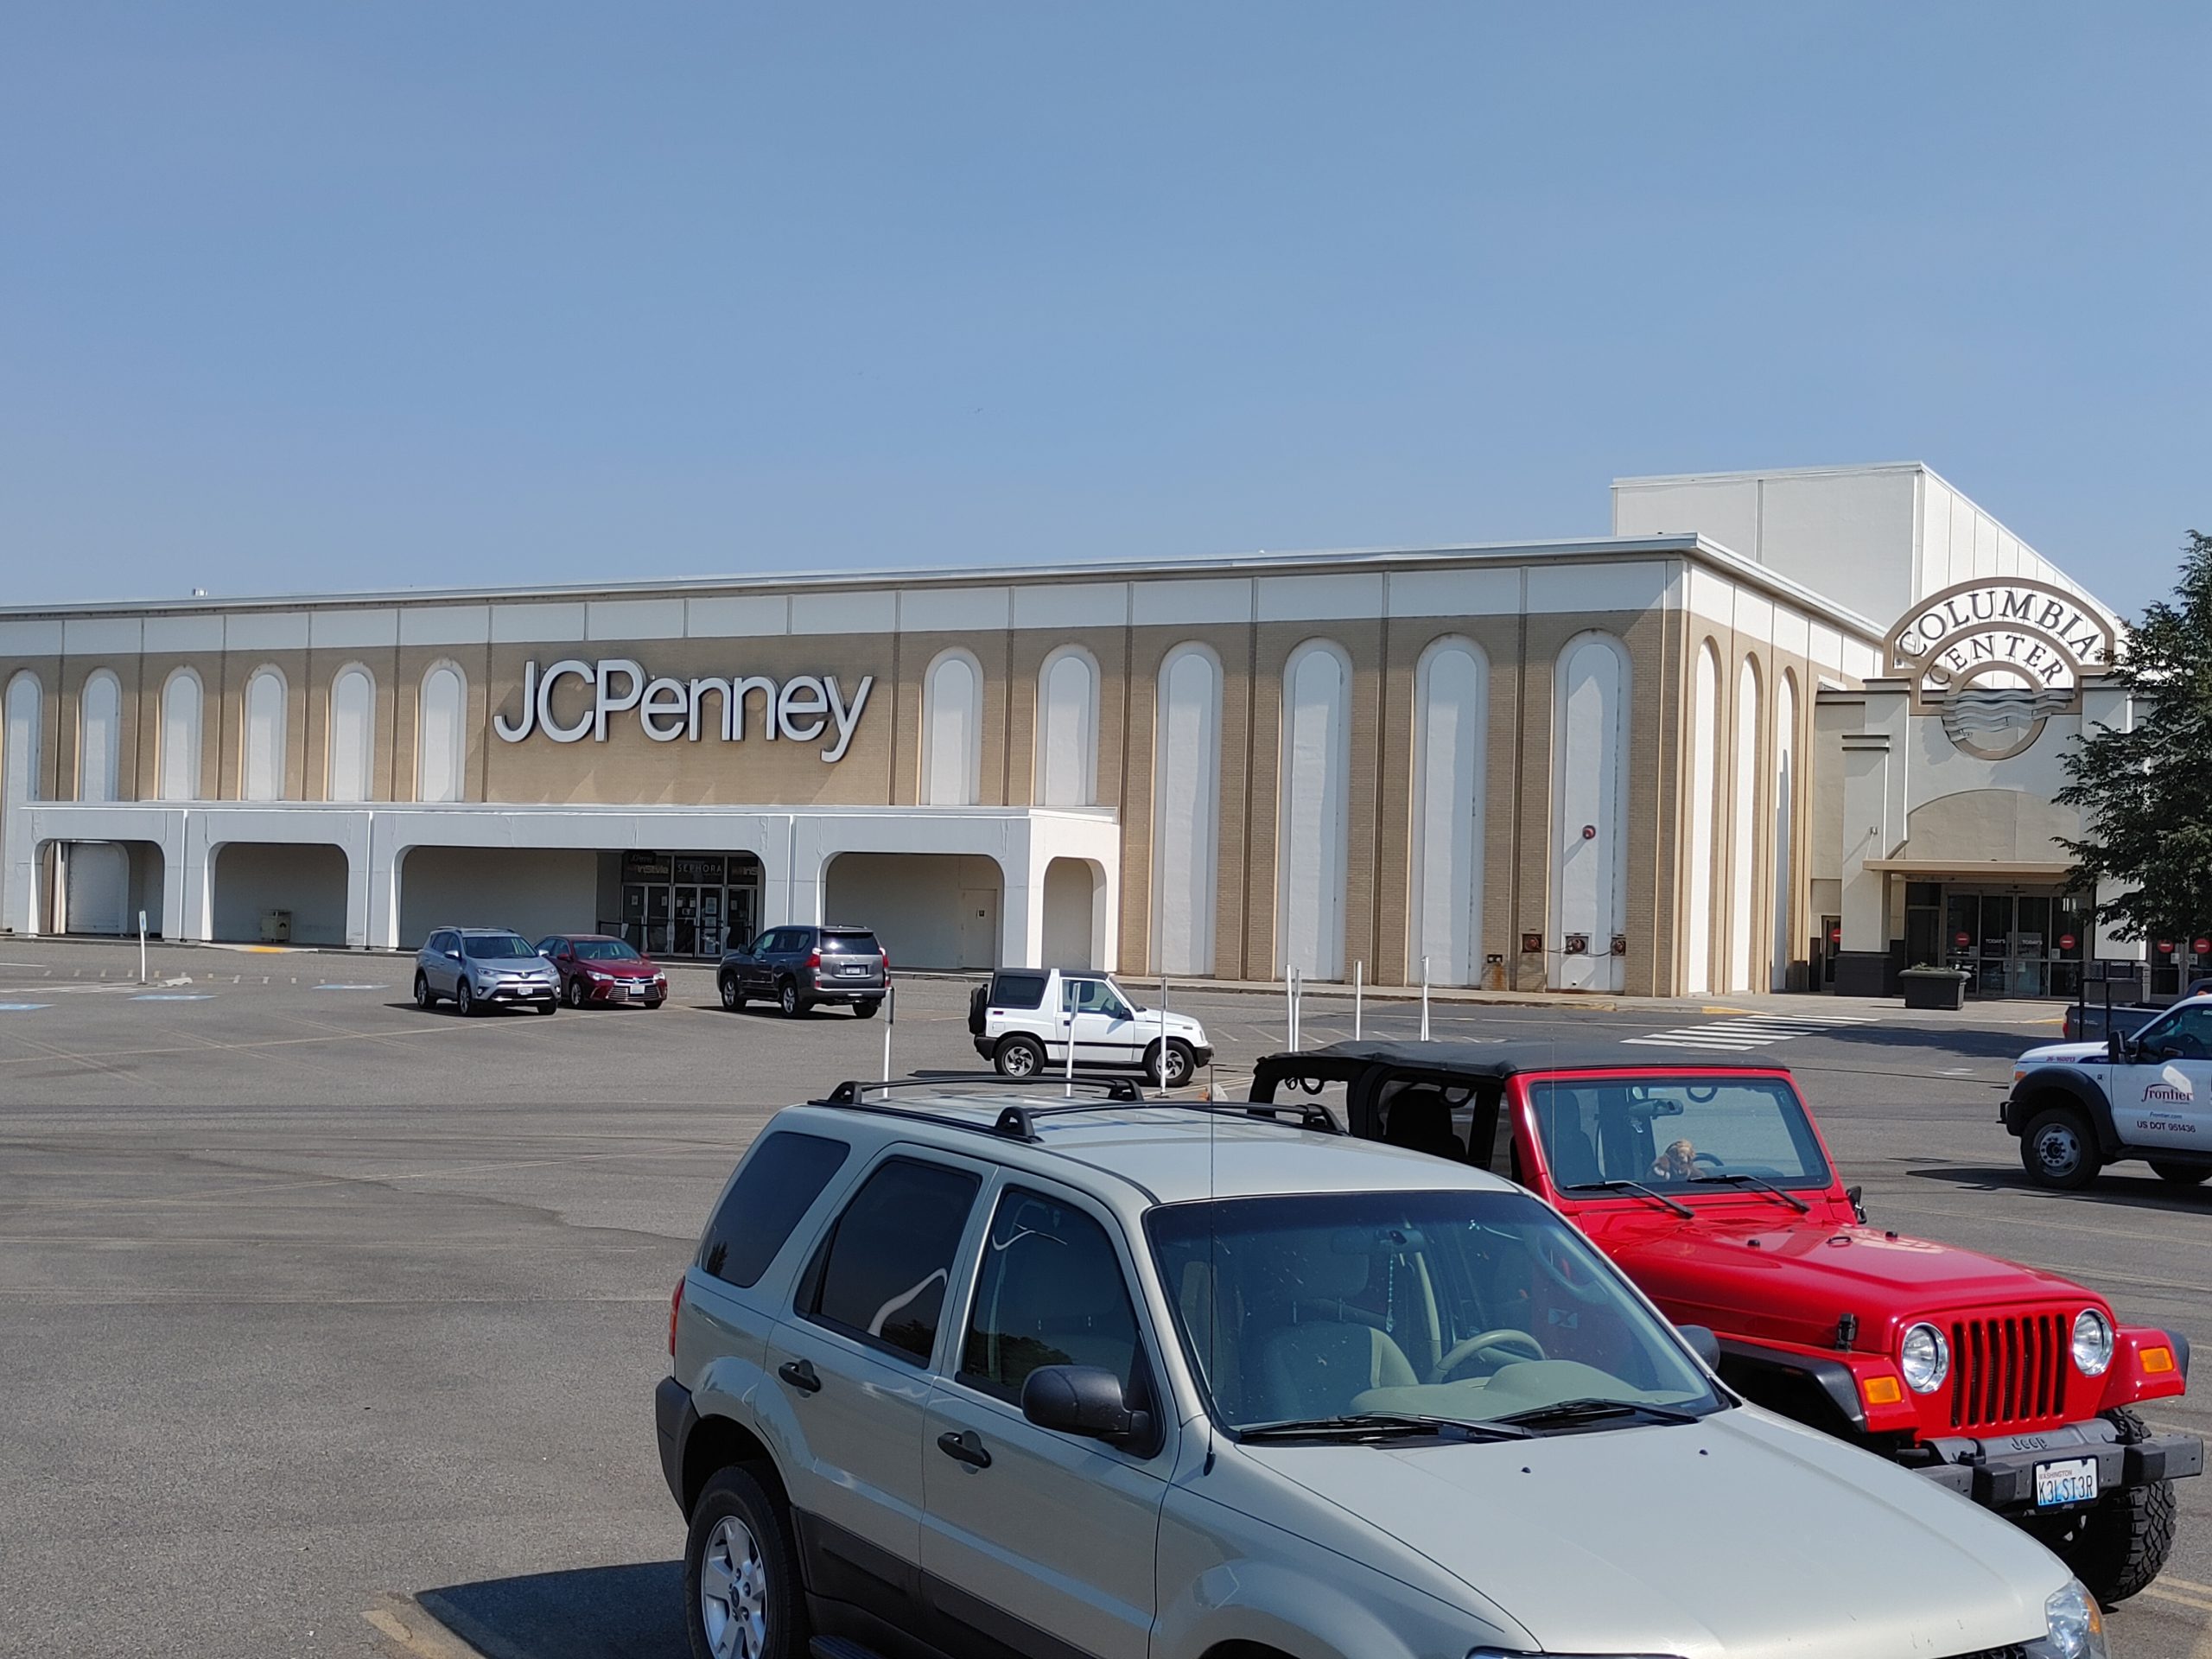 Mall owners close to buying JC Penney out of bankruptcy